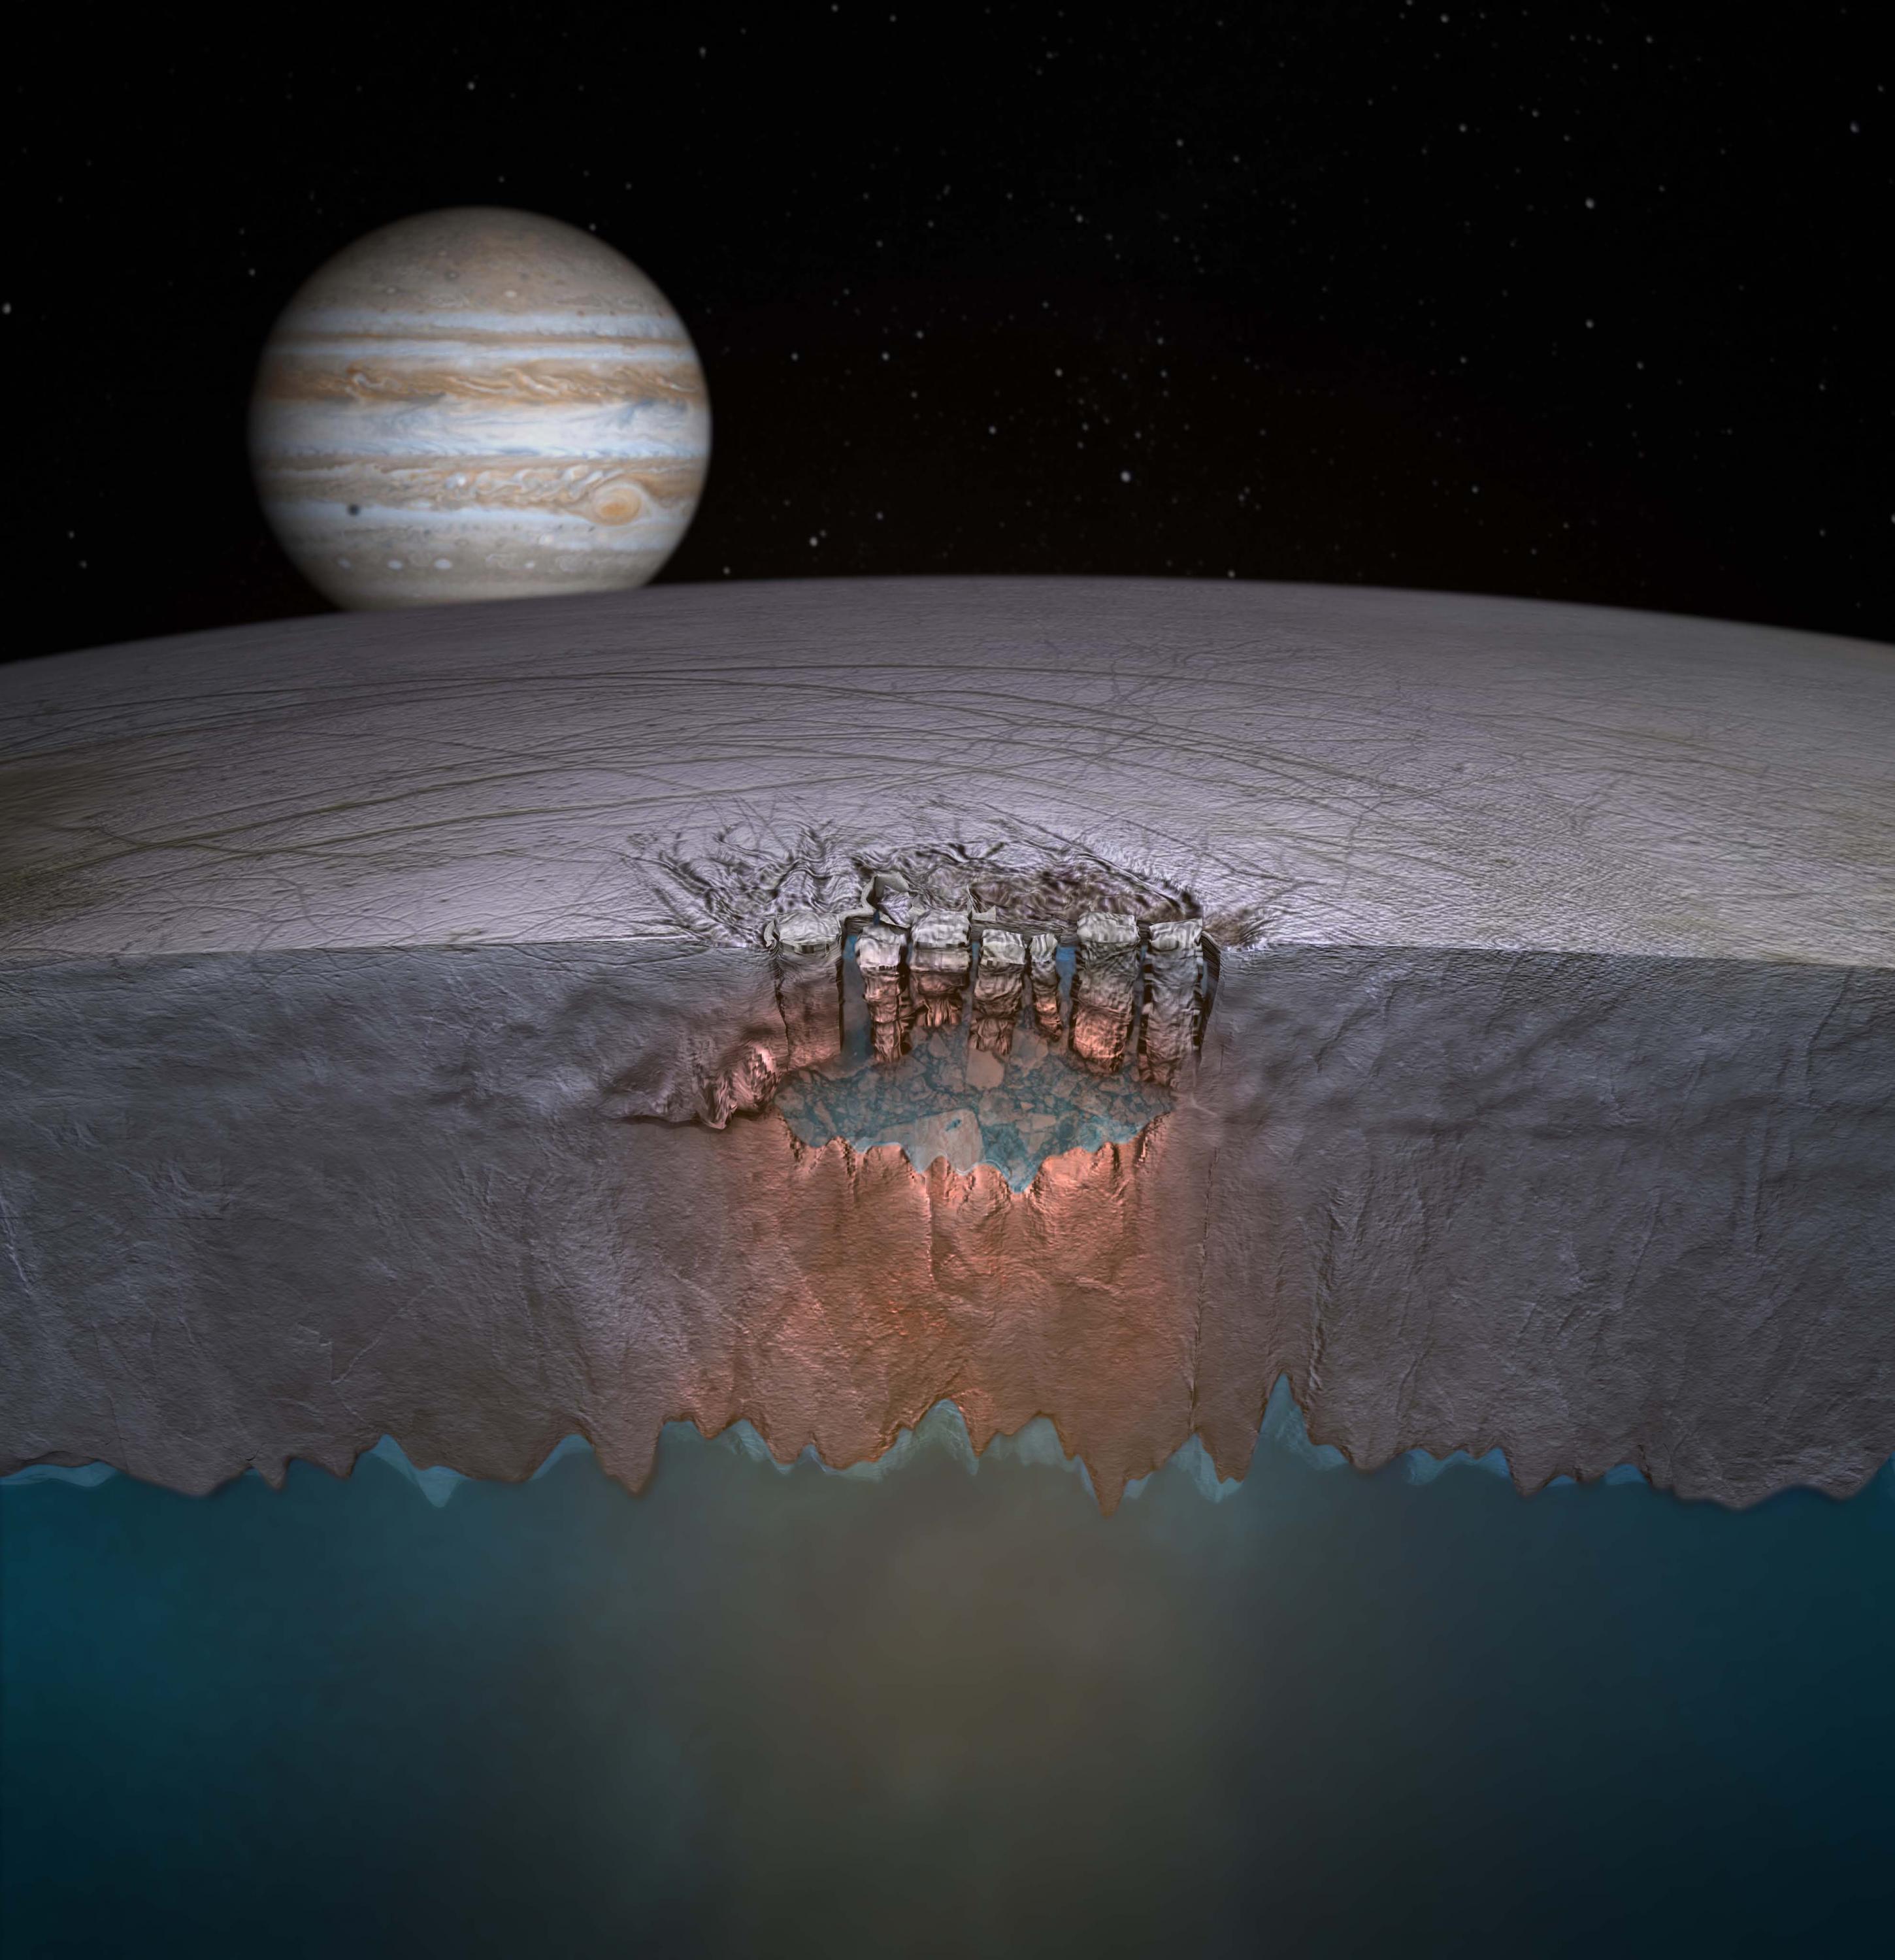 Europa. The name of Jupiter's icy moon has spread around the world as a hopeful candidate for life elsewhere in our solar system. If it's there, a new NASA-funded research alliance called Oceans Across Space and Time wants to find it. Credit: NASA handout/Britney Schmidt/Dead Pixel VFX/University of Texas, Austin